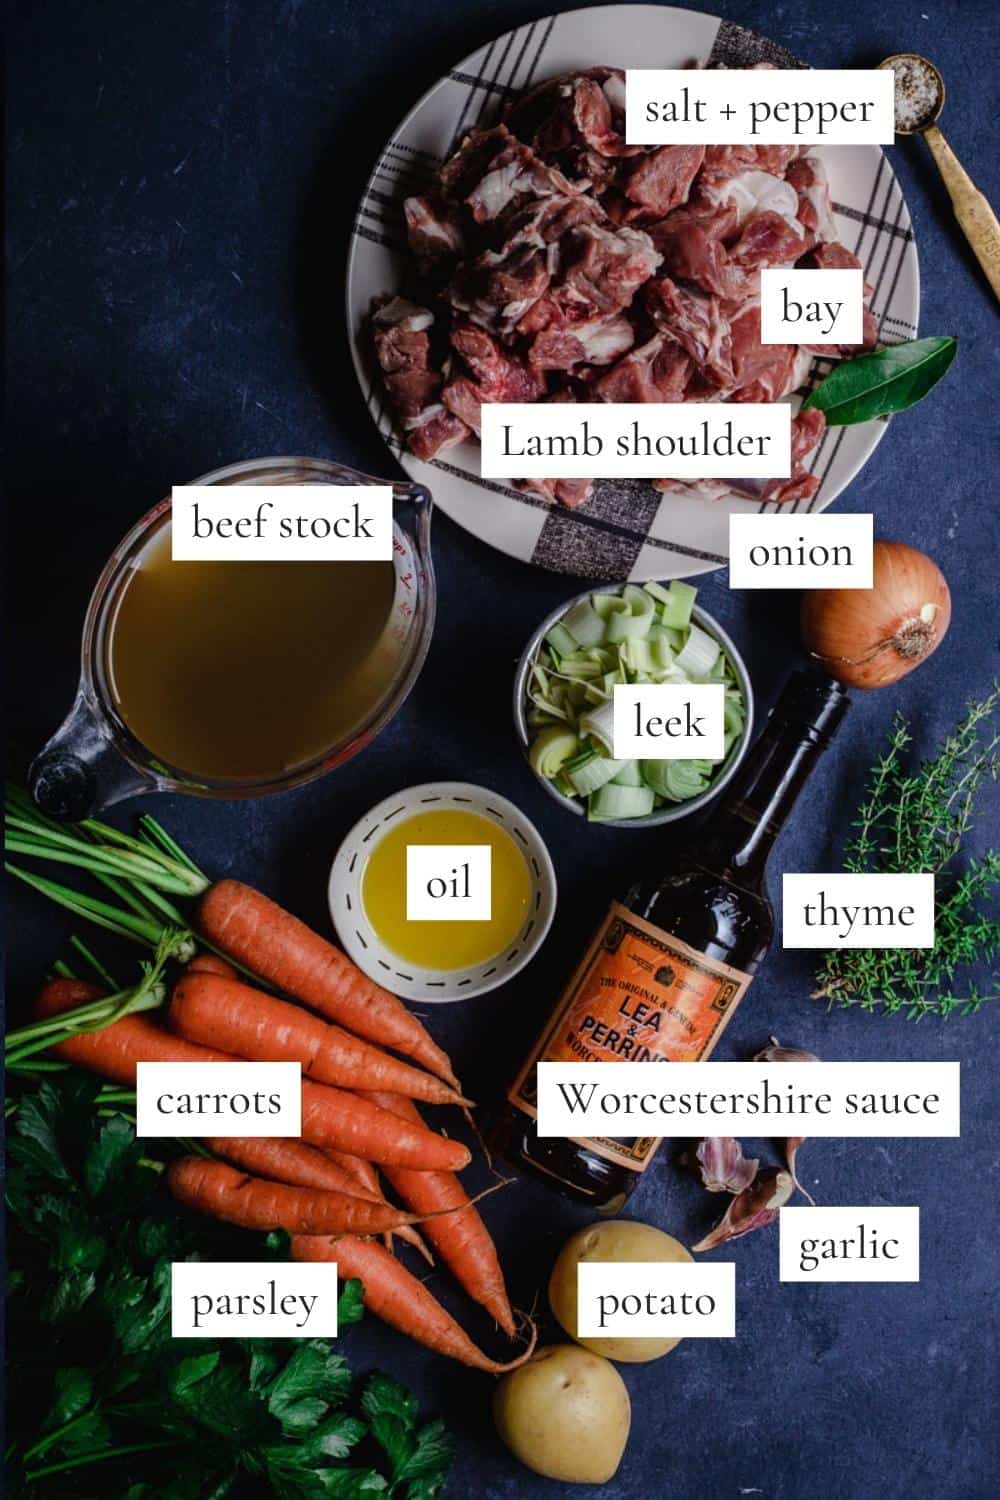 All the ingredients you need to make Irish Stew.